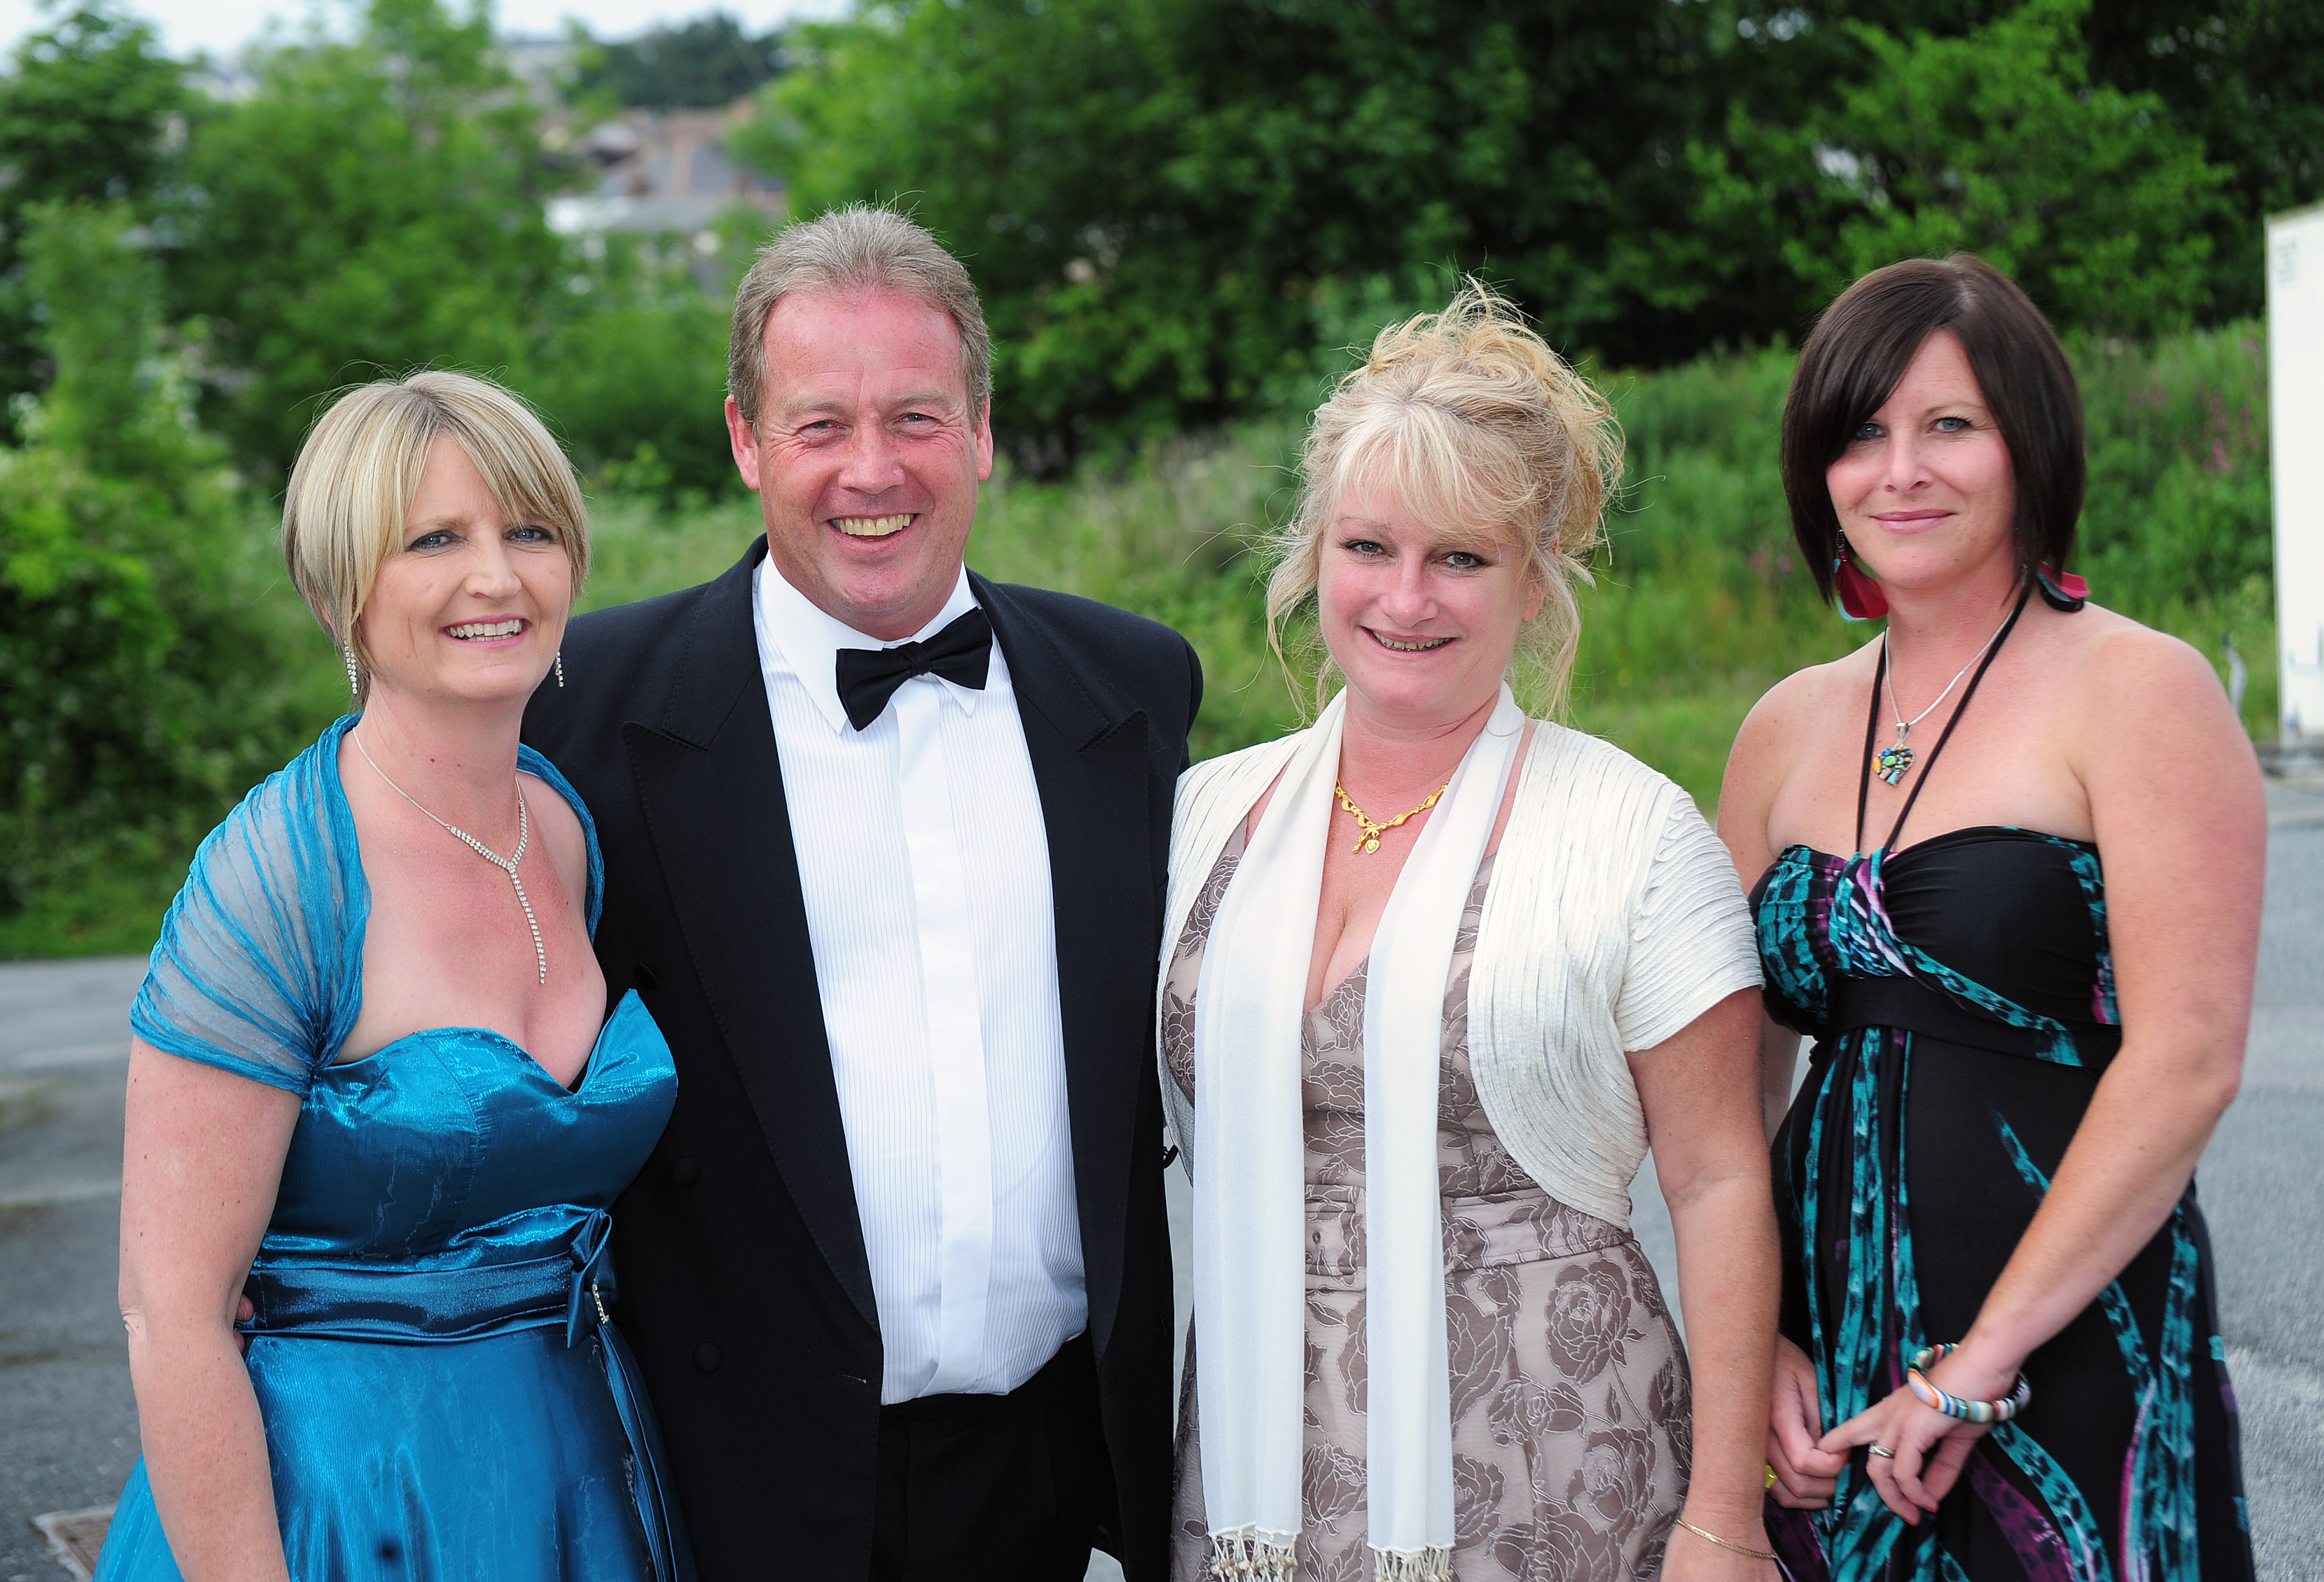 The WoW Sunshine Ball organisers are gearing up for the second annual charity event for Cornwall Hospice Care (L-R) Donna Hansen (Worldwide Financial Planning), Julian Jenkins (Santander), Lynne Williams (Worldwide Financial Planning) and Rebecca Bendle (Worldwide Financial Planning) 